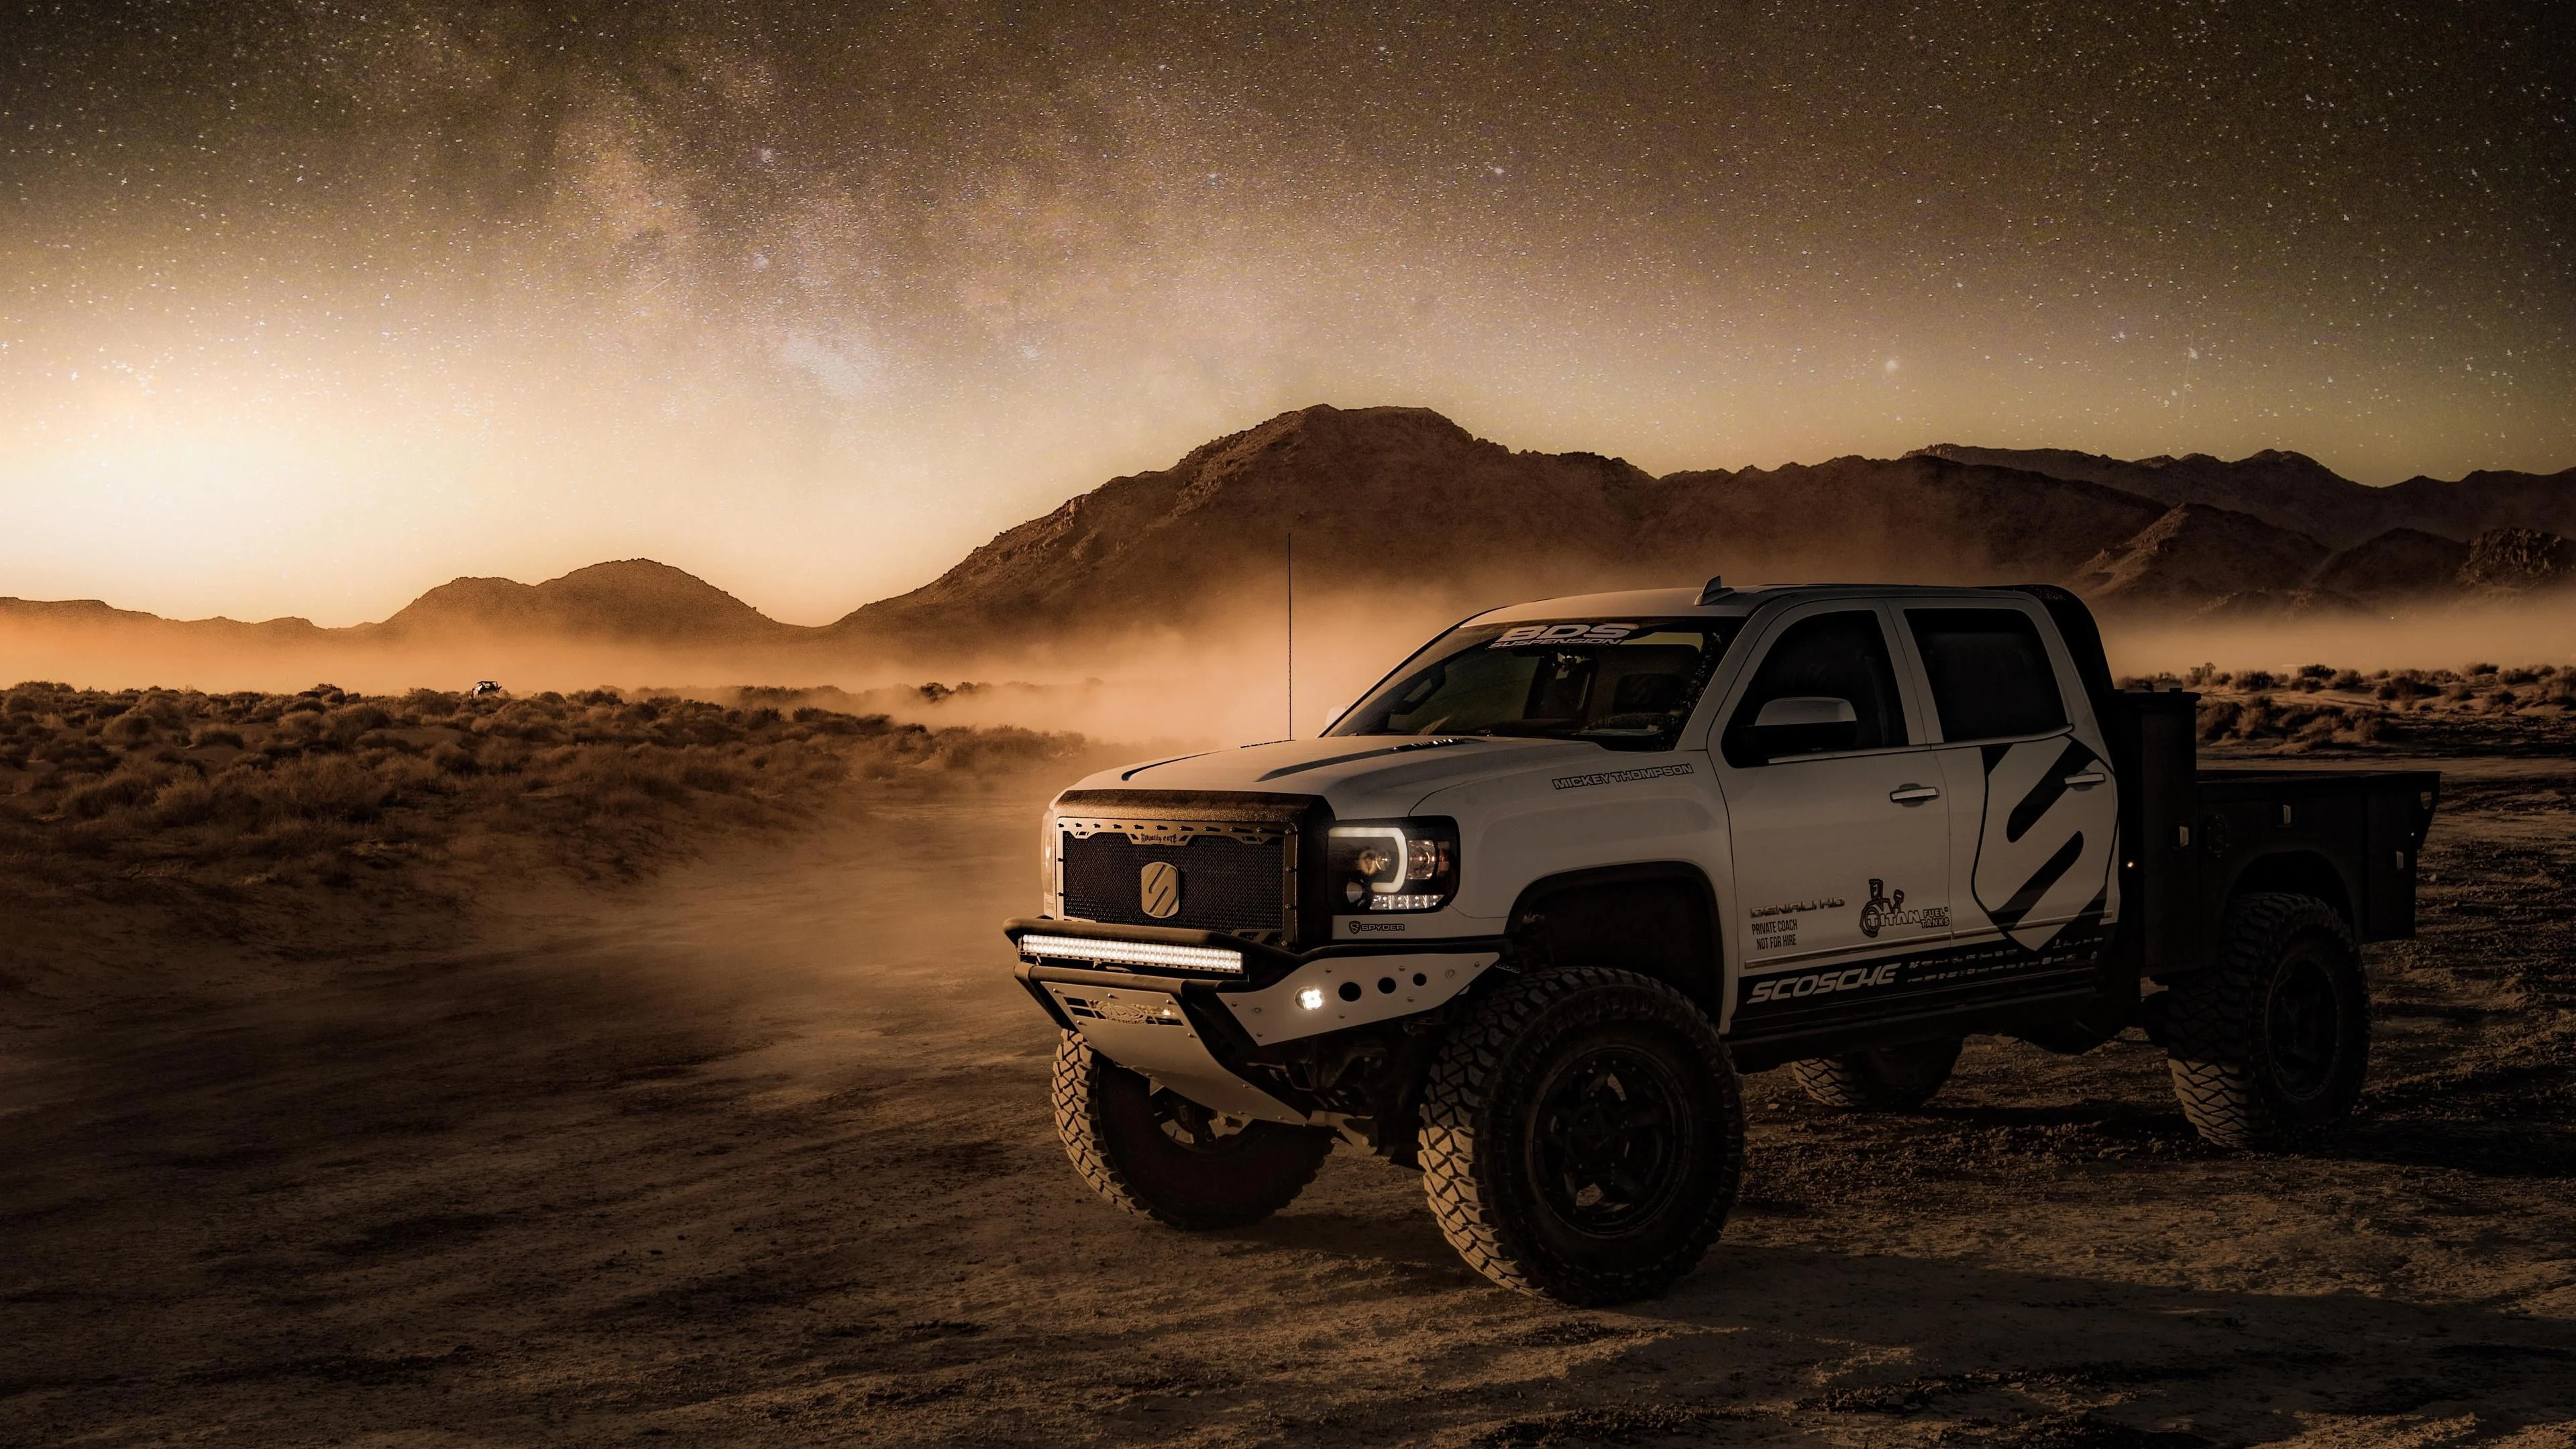 Off-road Driving: SUVs with higher ground clearance, Off-road use, Driving on sand. 3840x2160 4K Wallpaper.